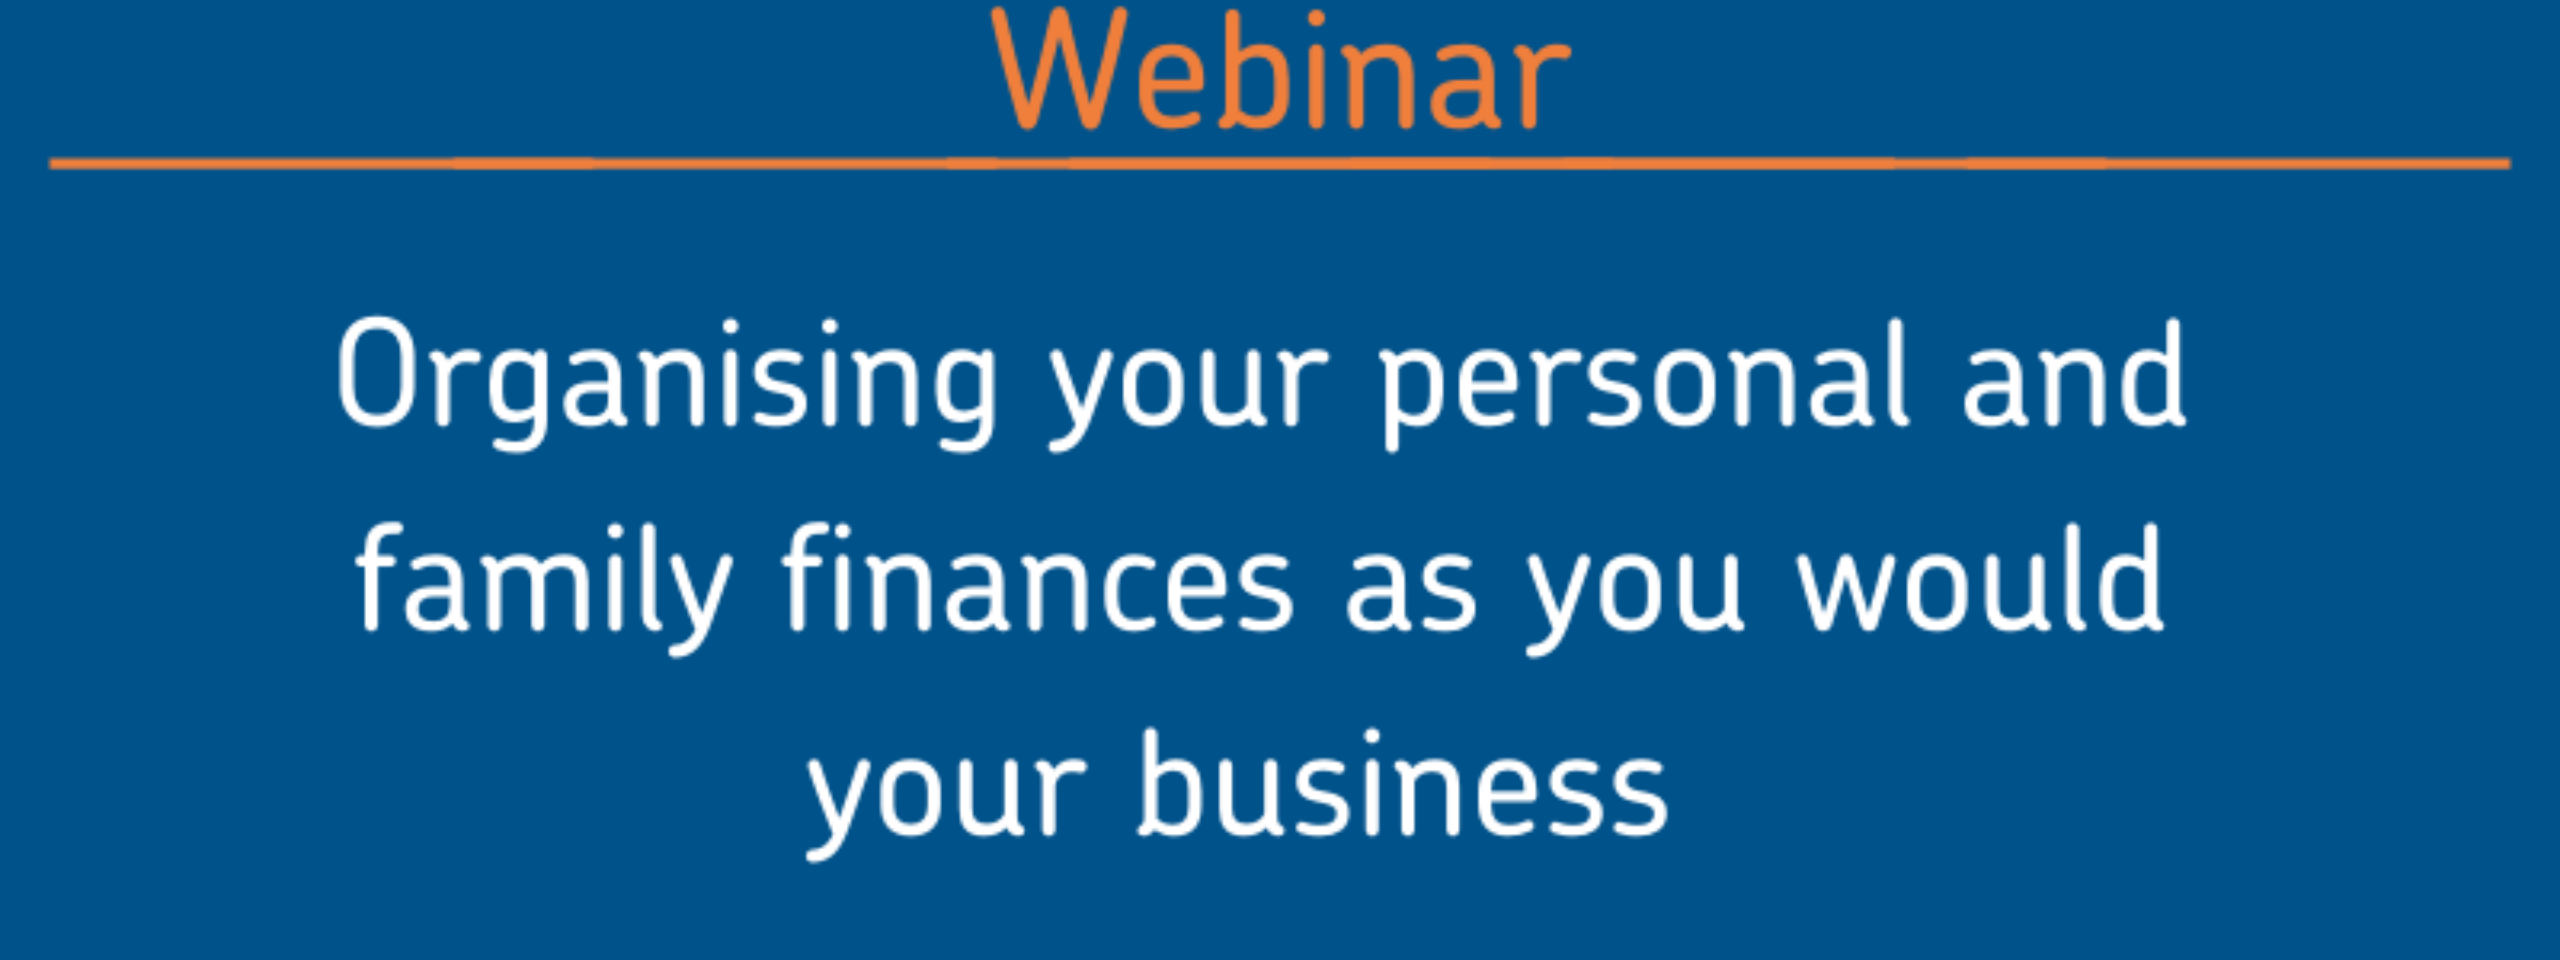 Xentum | Join our live webinar: organising your personal and family finances as you would your business